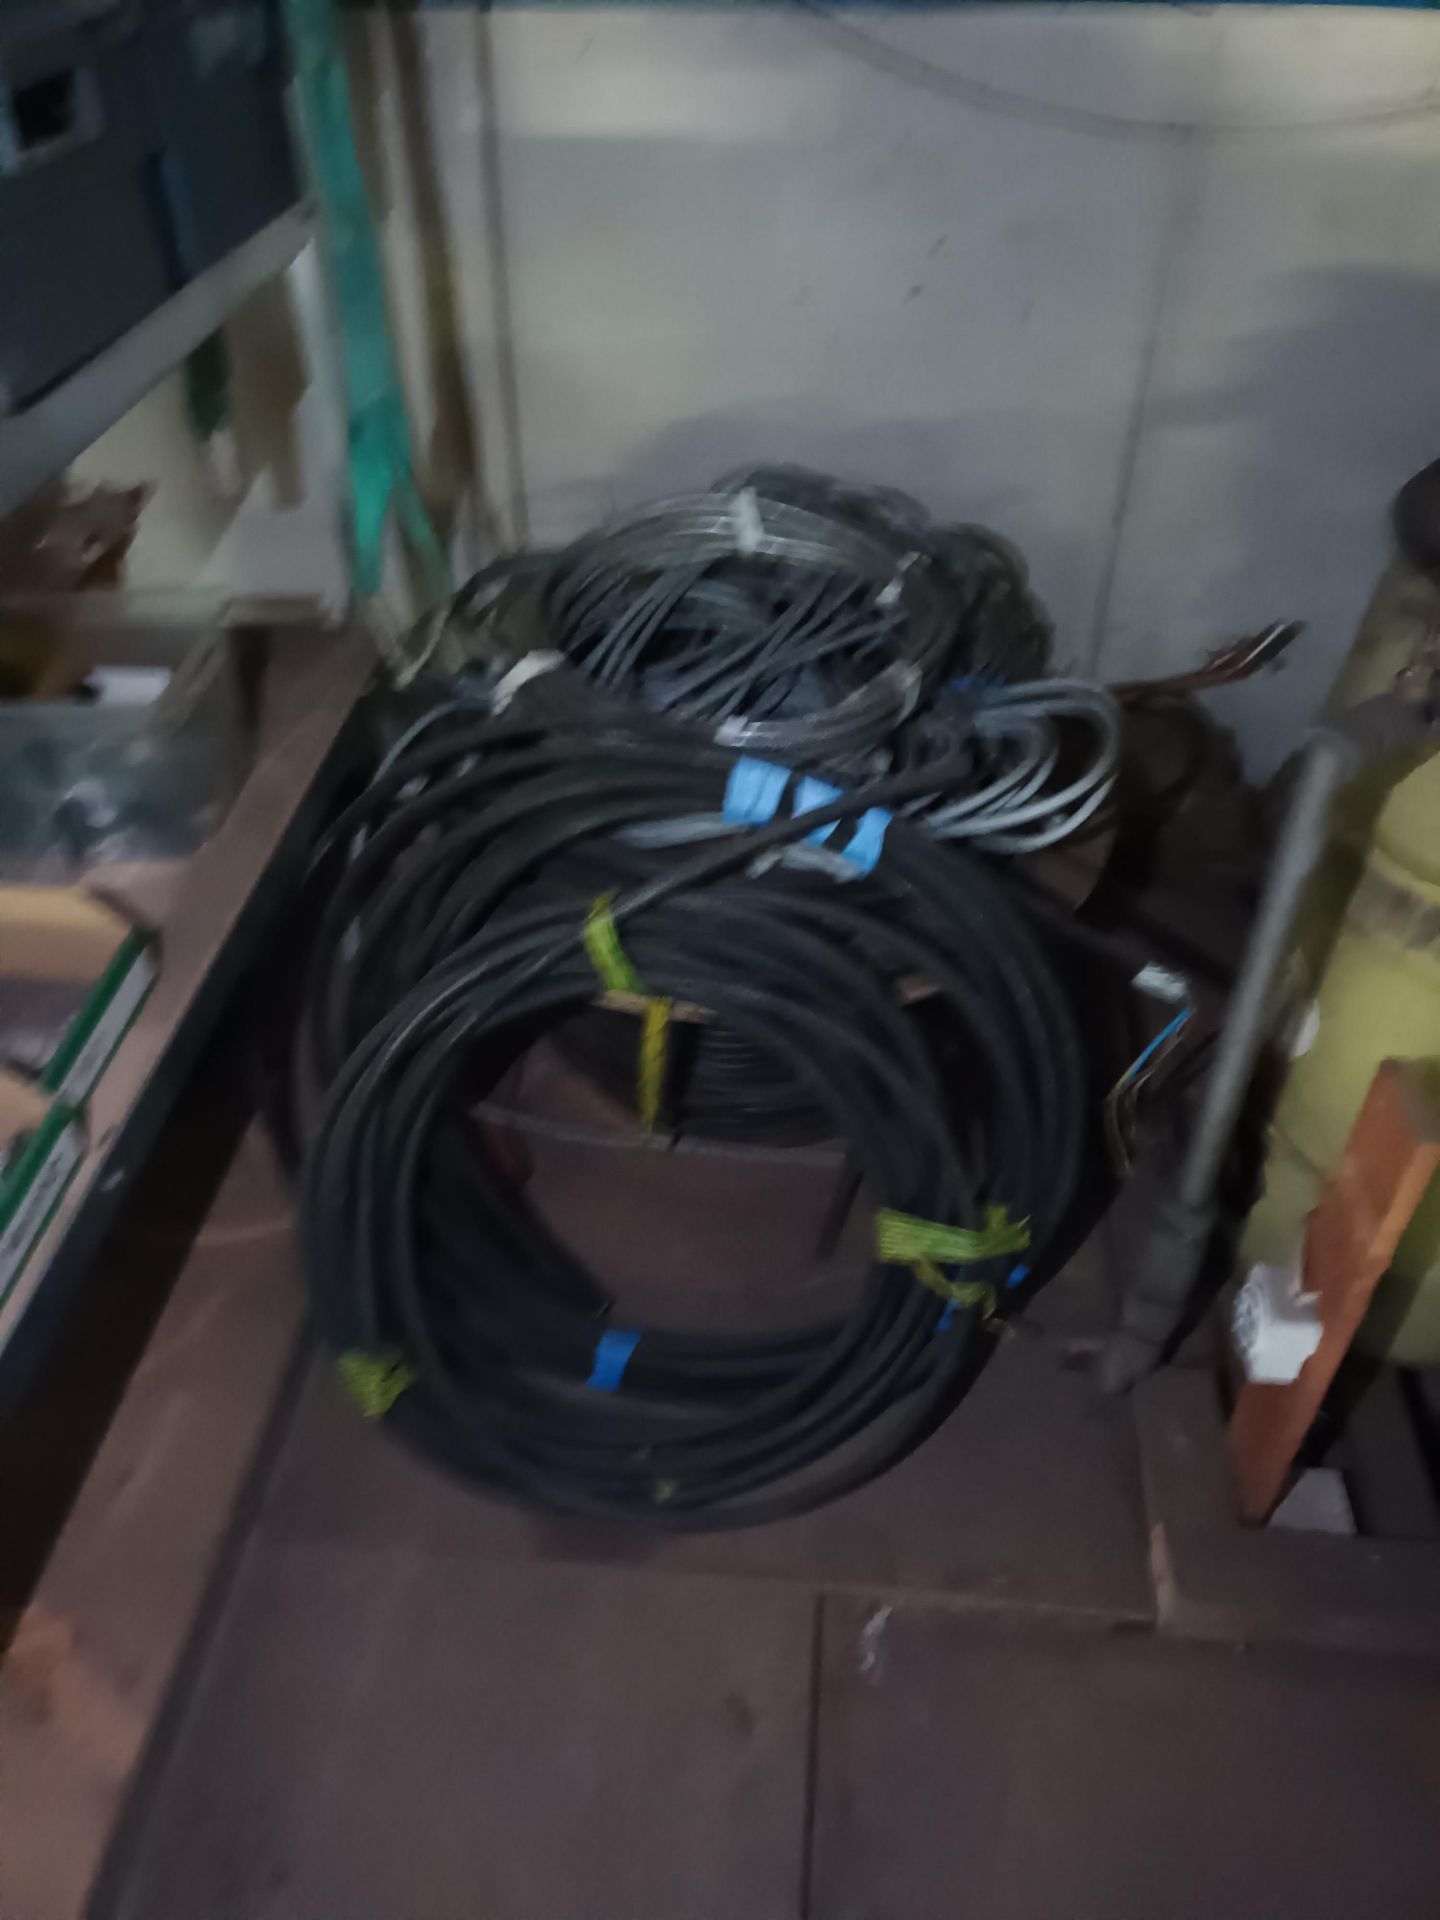 Contents of upstairs stock room to include large quantity of various wire insulation tape, adaptable - Image 13 of 17